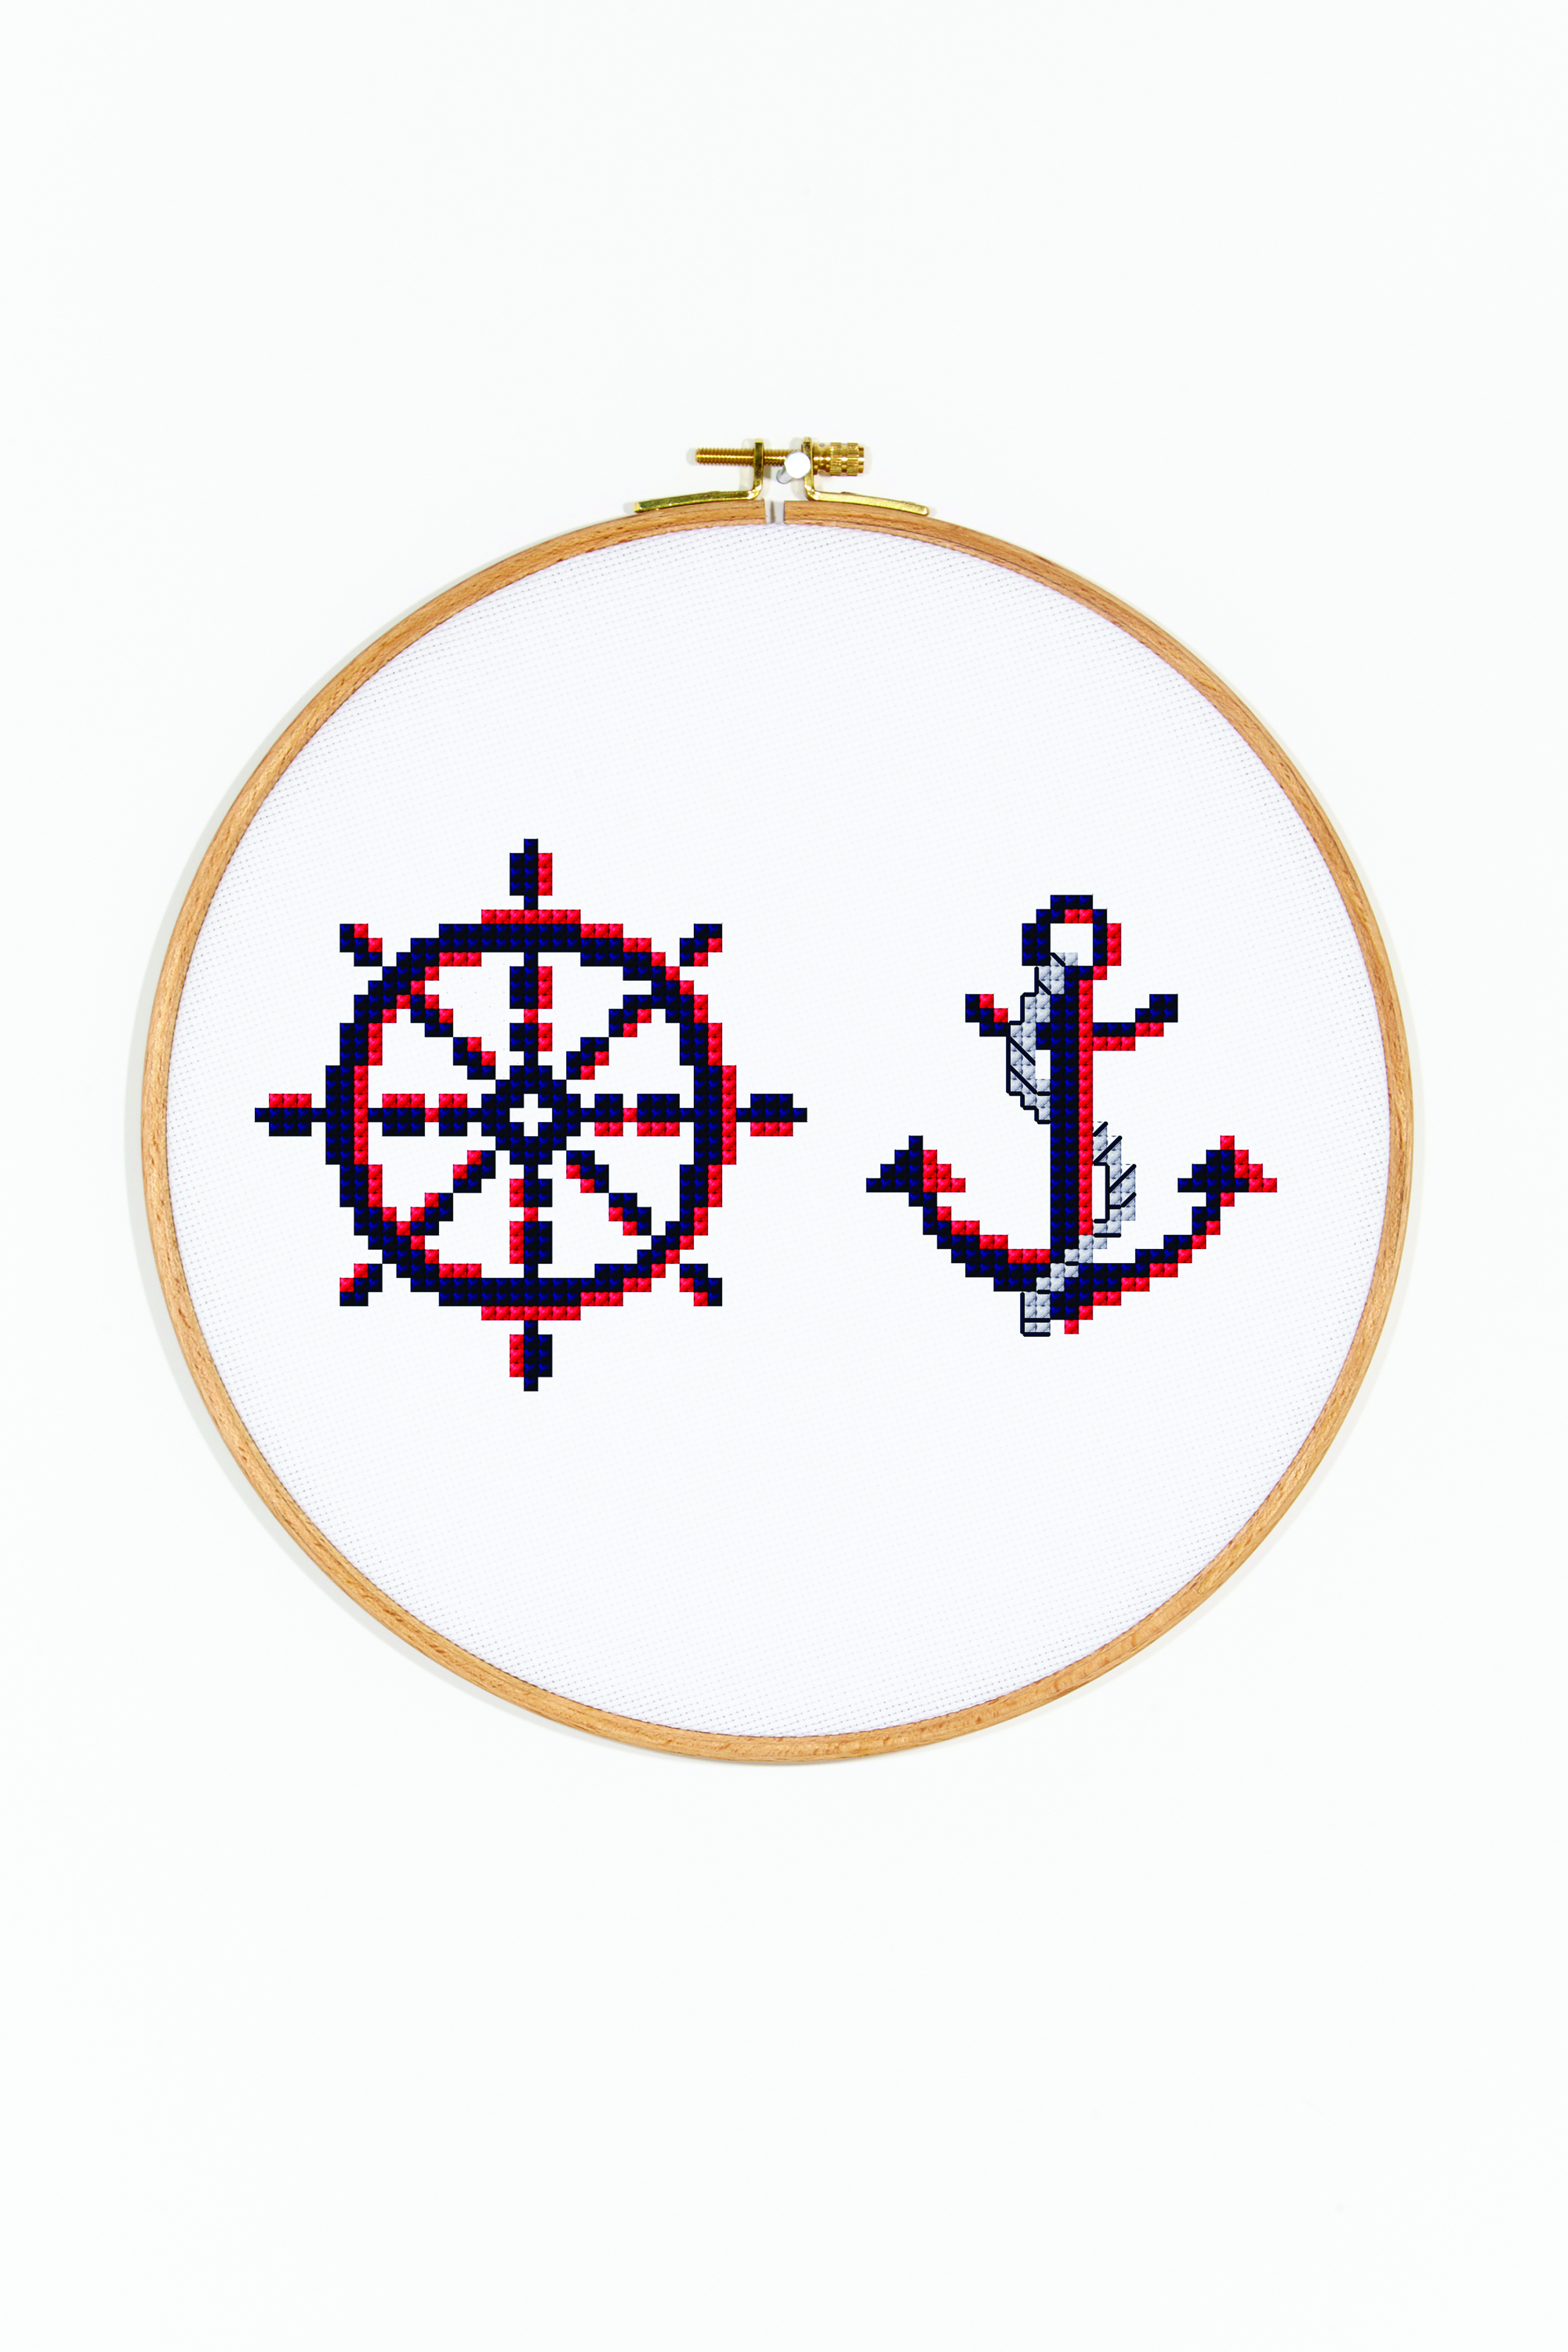 Nautical Embroidery Patterns The Nautical Anchor Cross Stitch Pattern